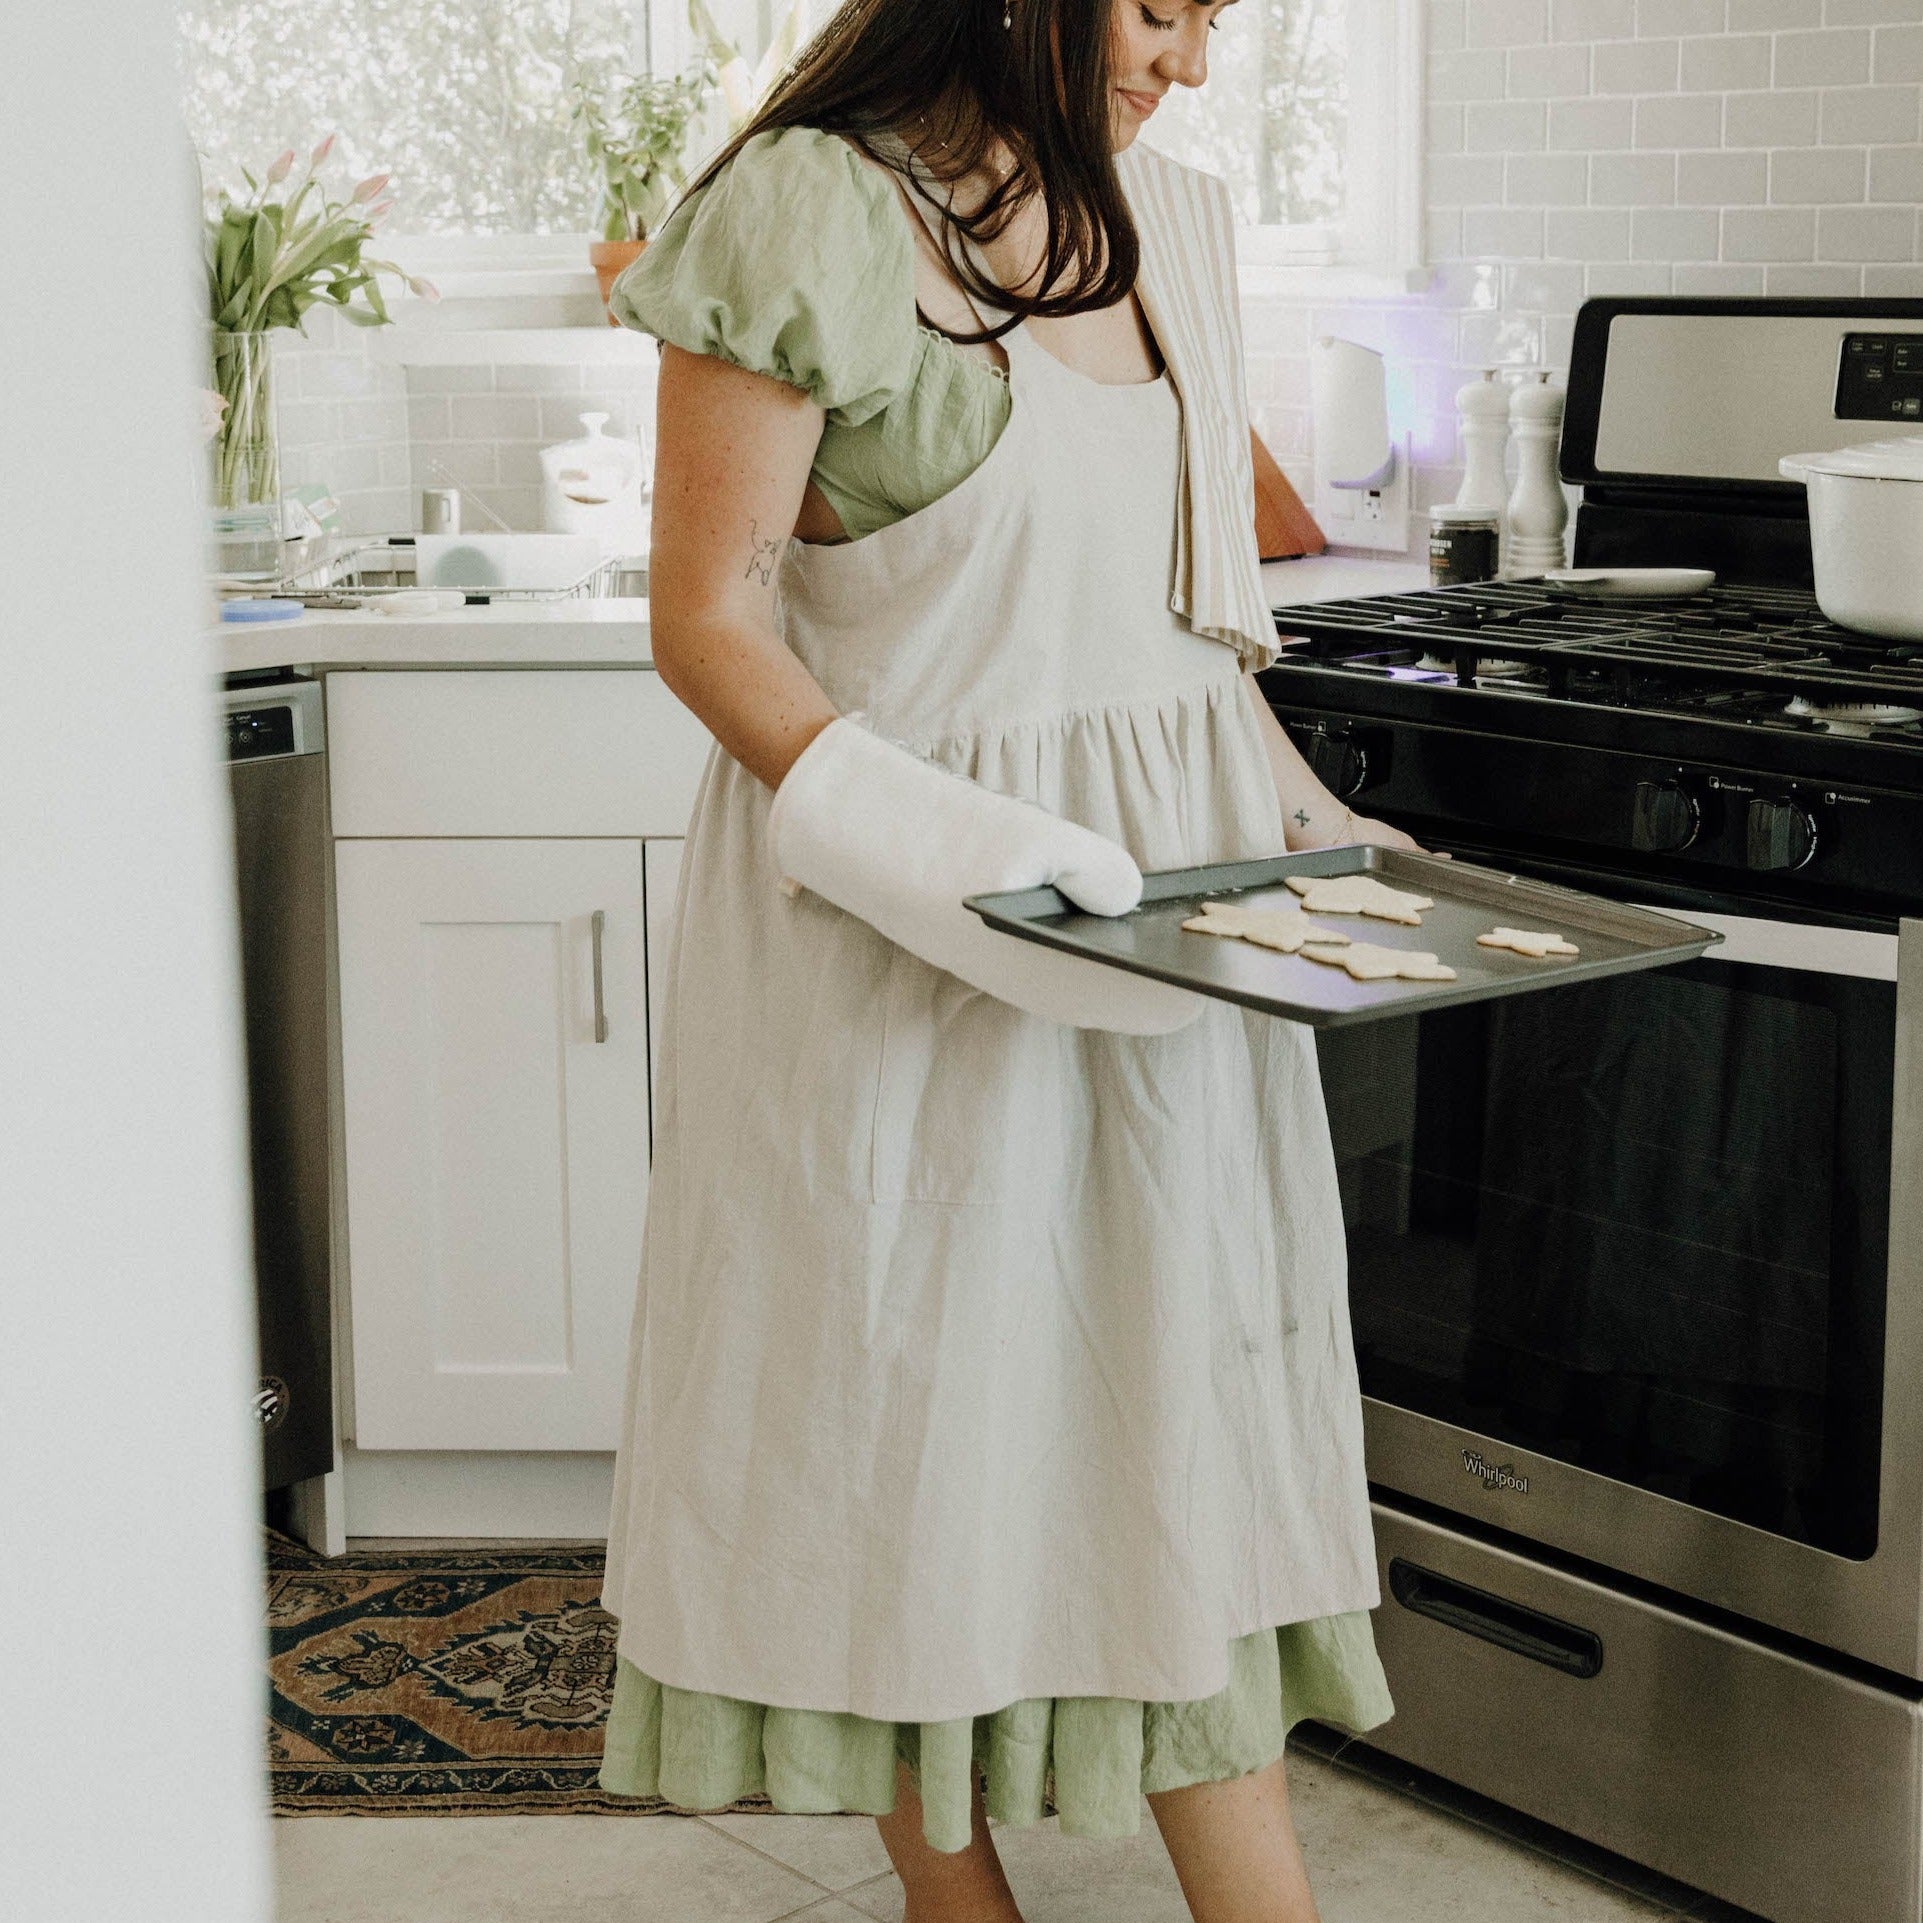 A woman wearing a green dress with an oatmeal colored kitchen apron. She is holding a tray of sugar cookies in a kitchen.